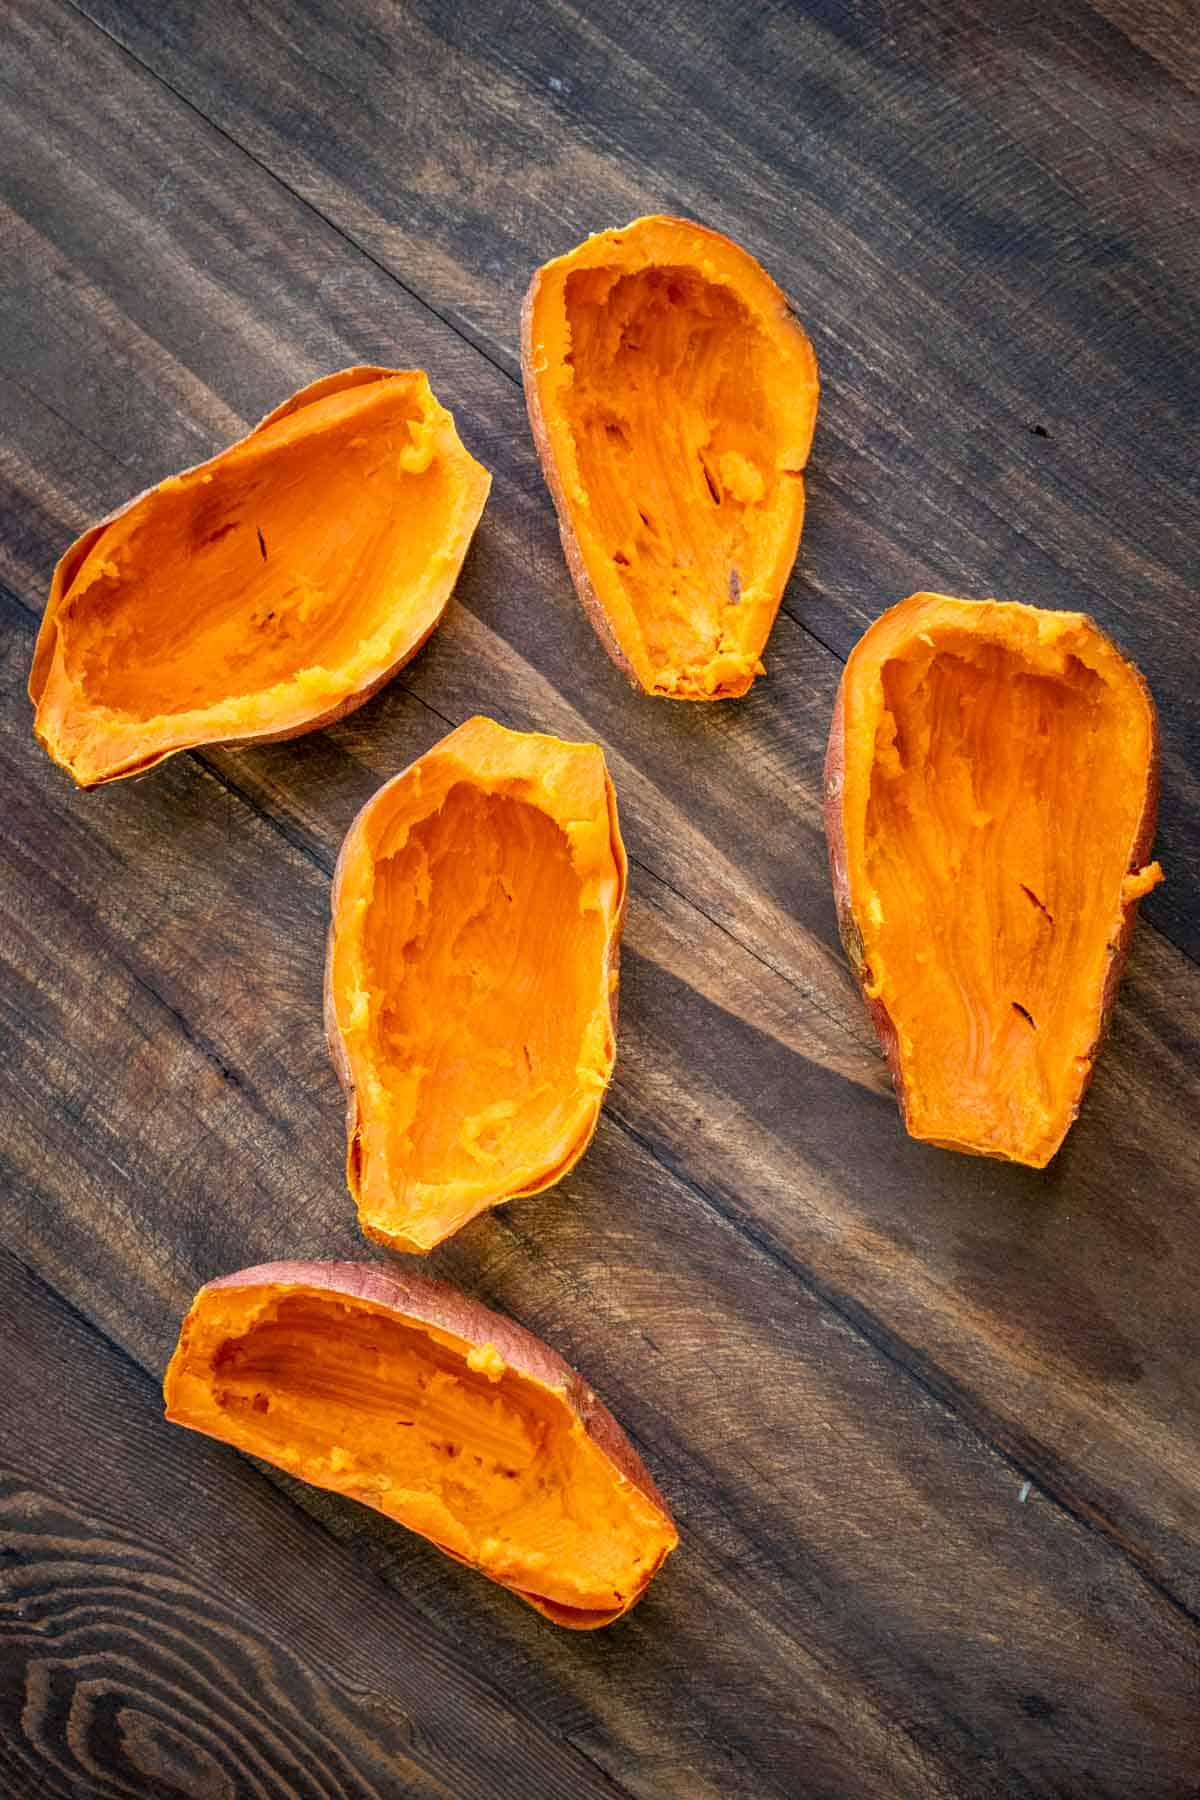 Top view of baked sweet potato skins with insides scooped out